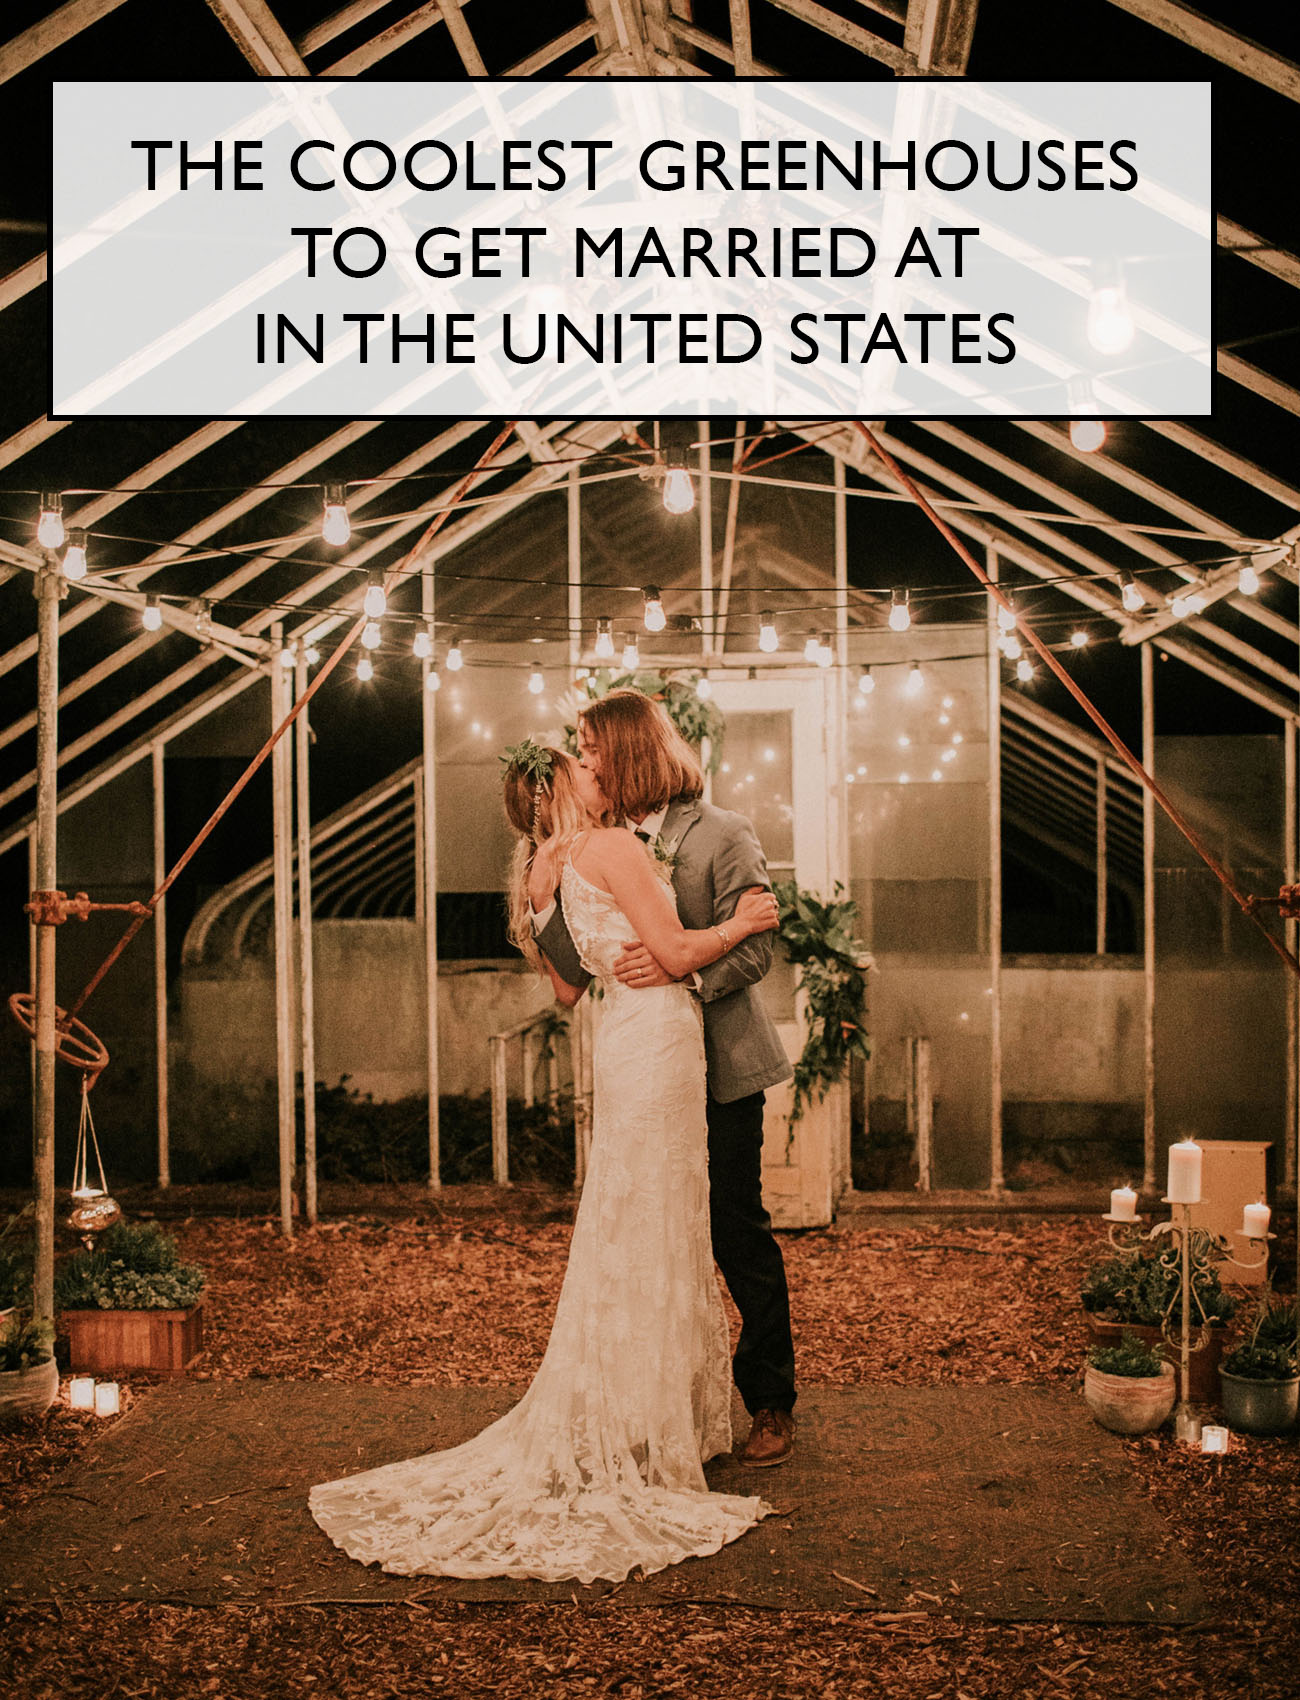 The Coolest Greenhouses to Get Married At in the United States